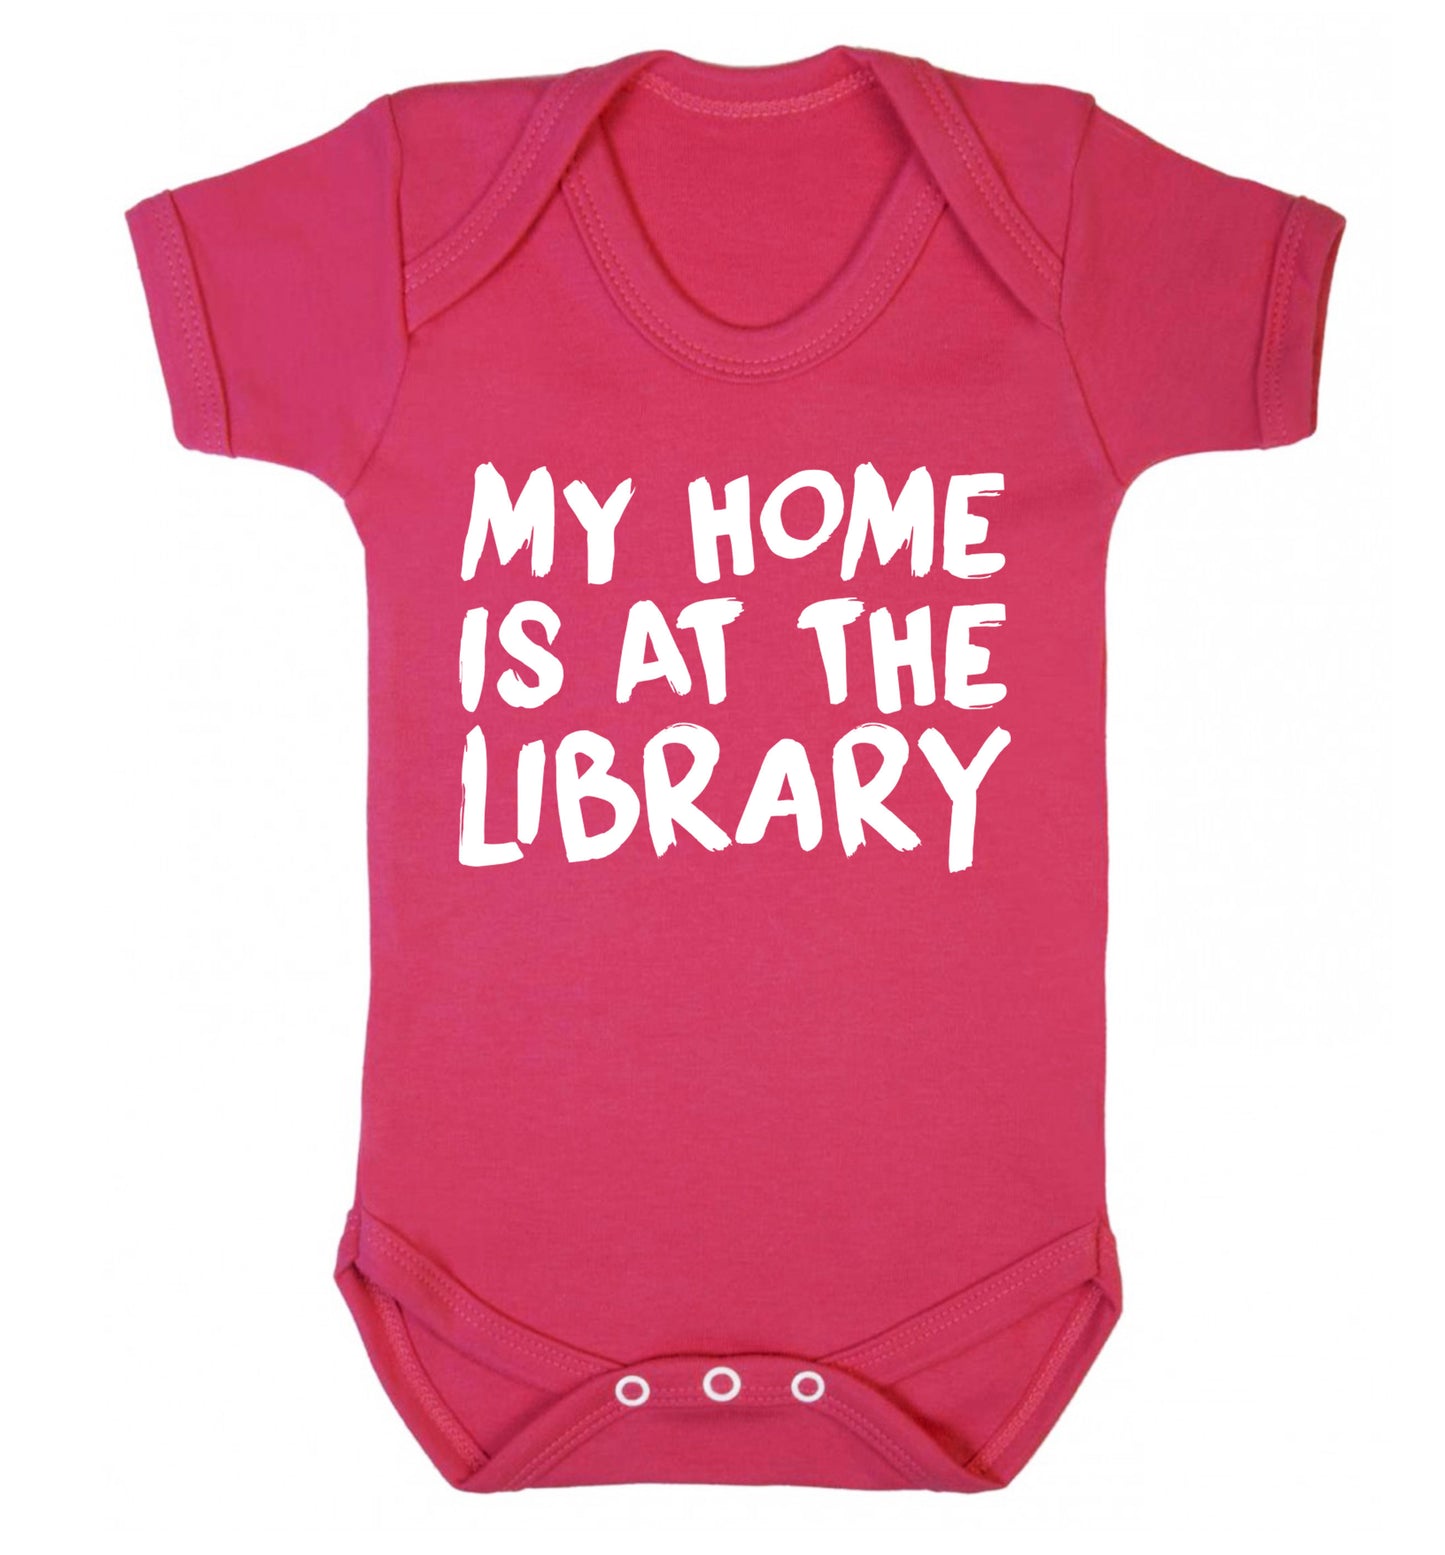 My home is at the library Baby Vest dark pink 18-24 months